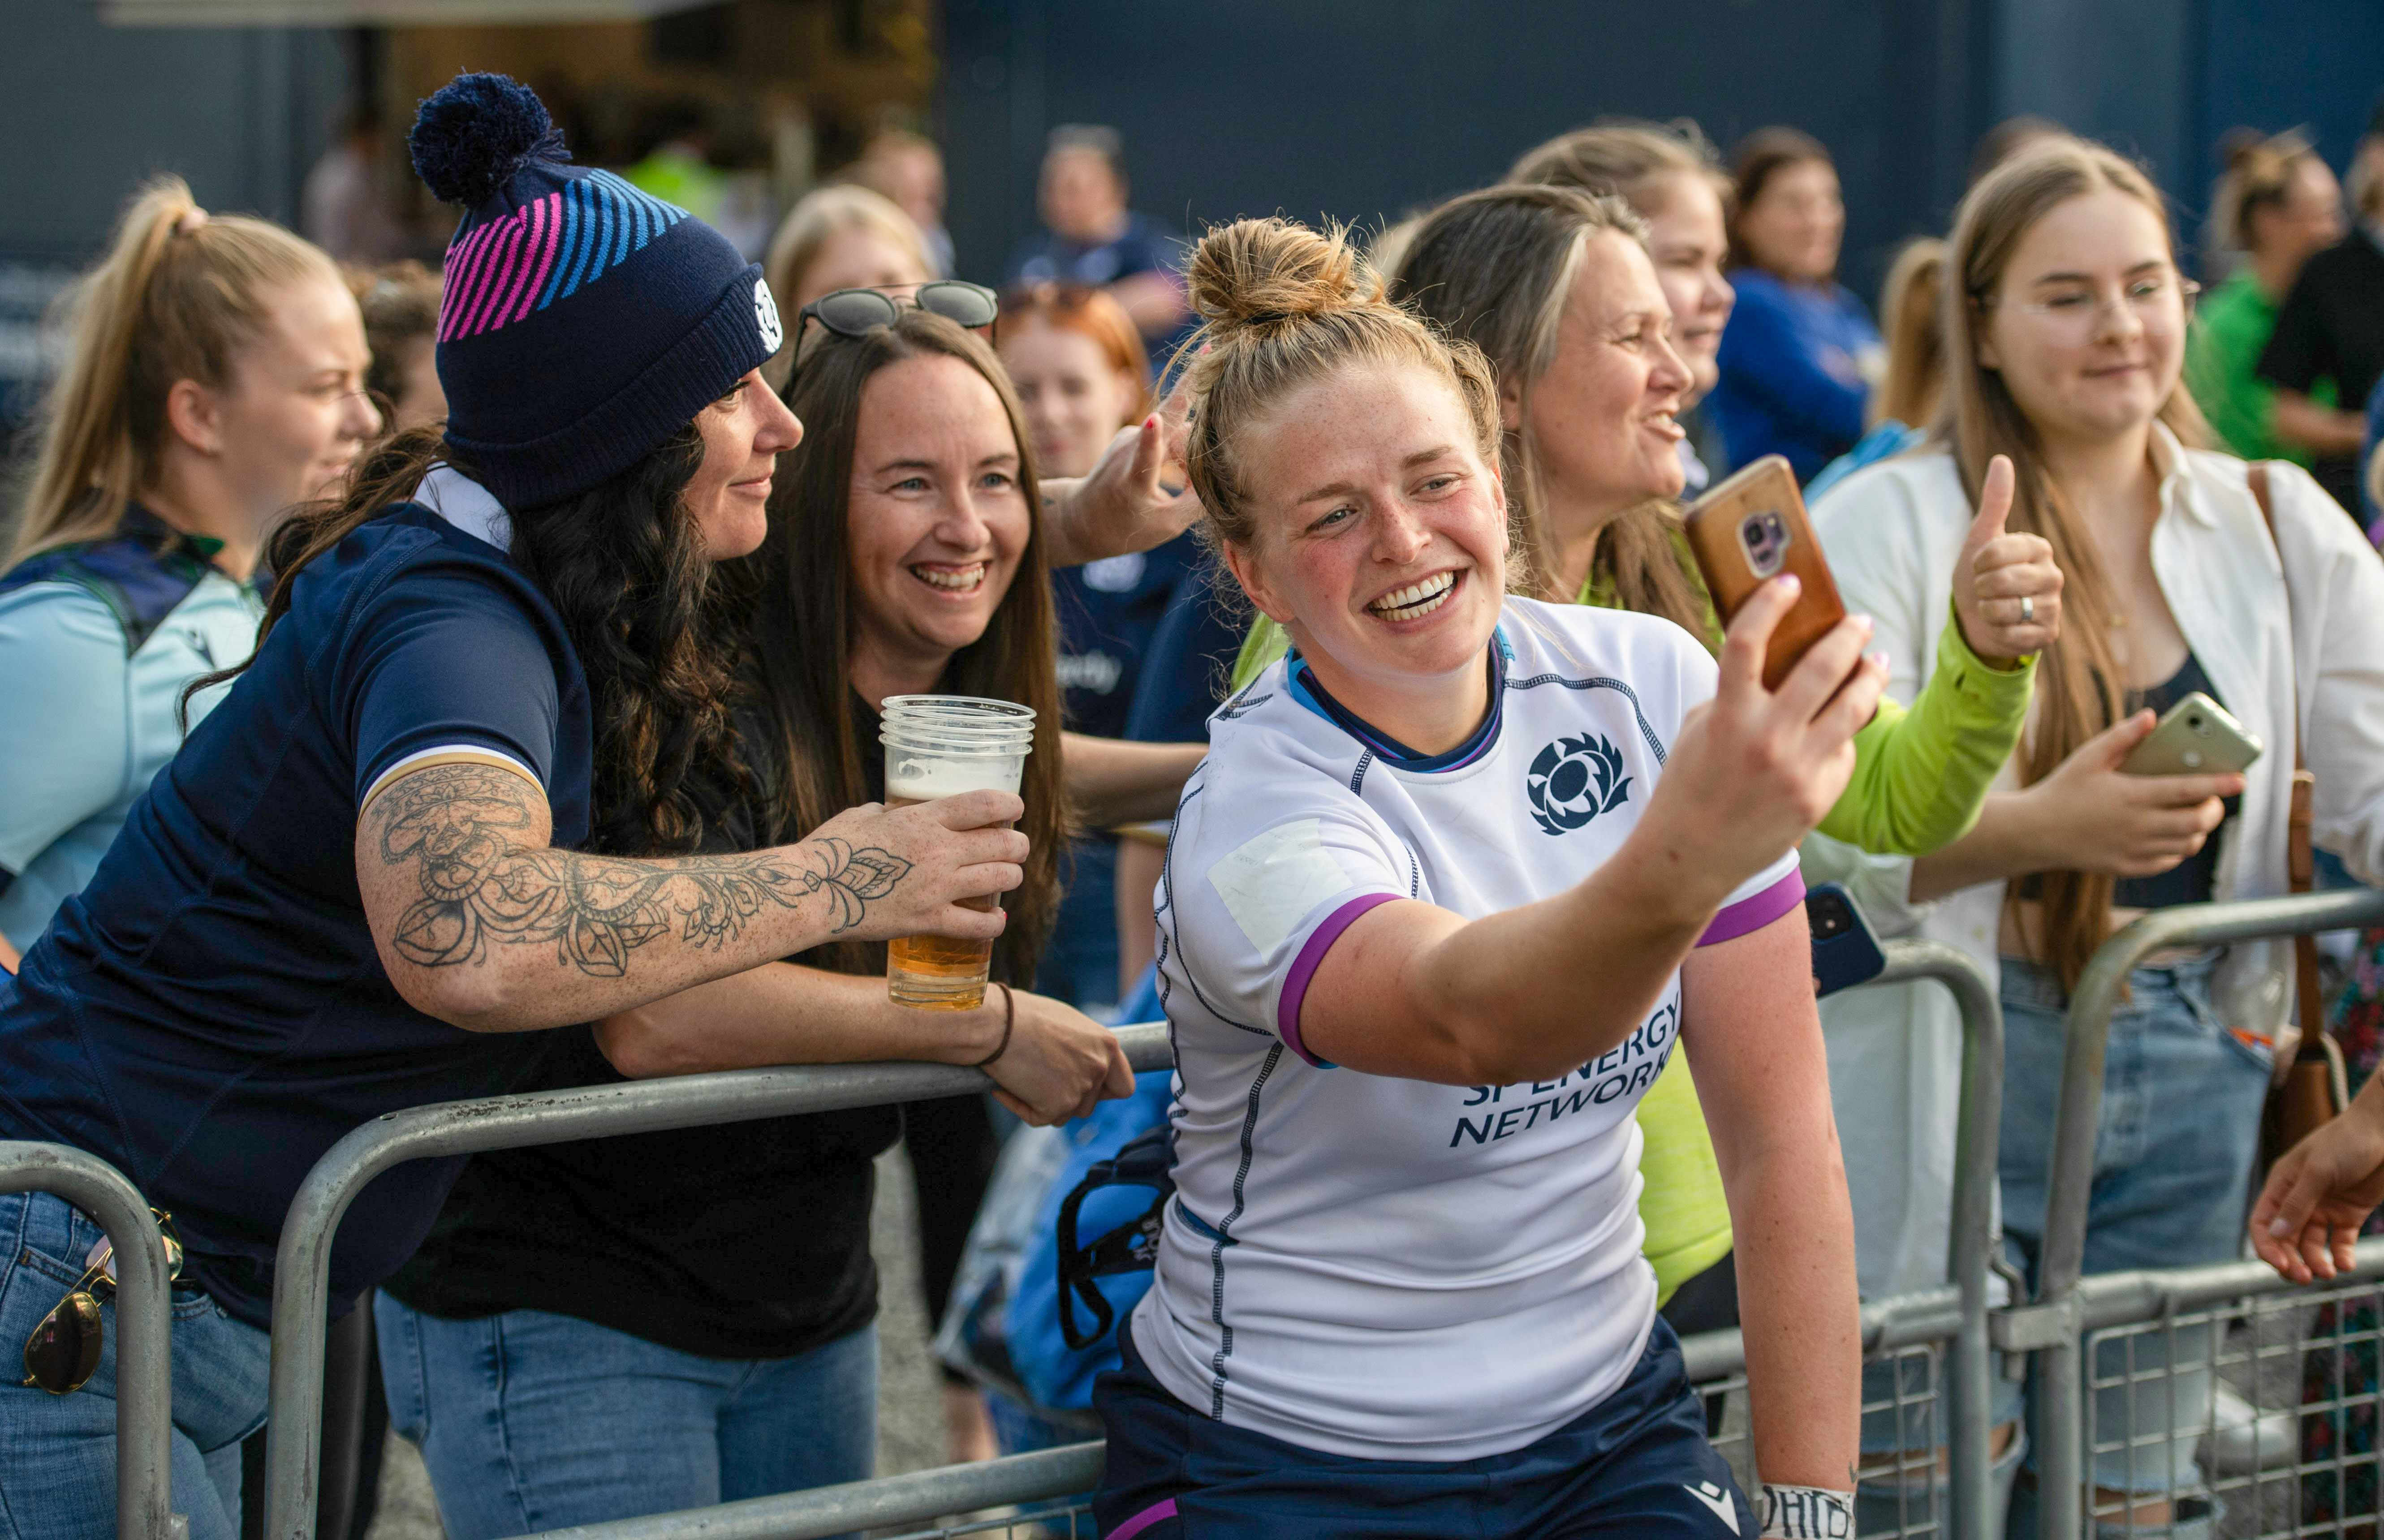 Image shows a rugby player taking a selfie on her mobile, with the crowd behind metal barriers.